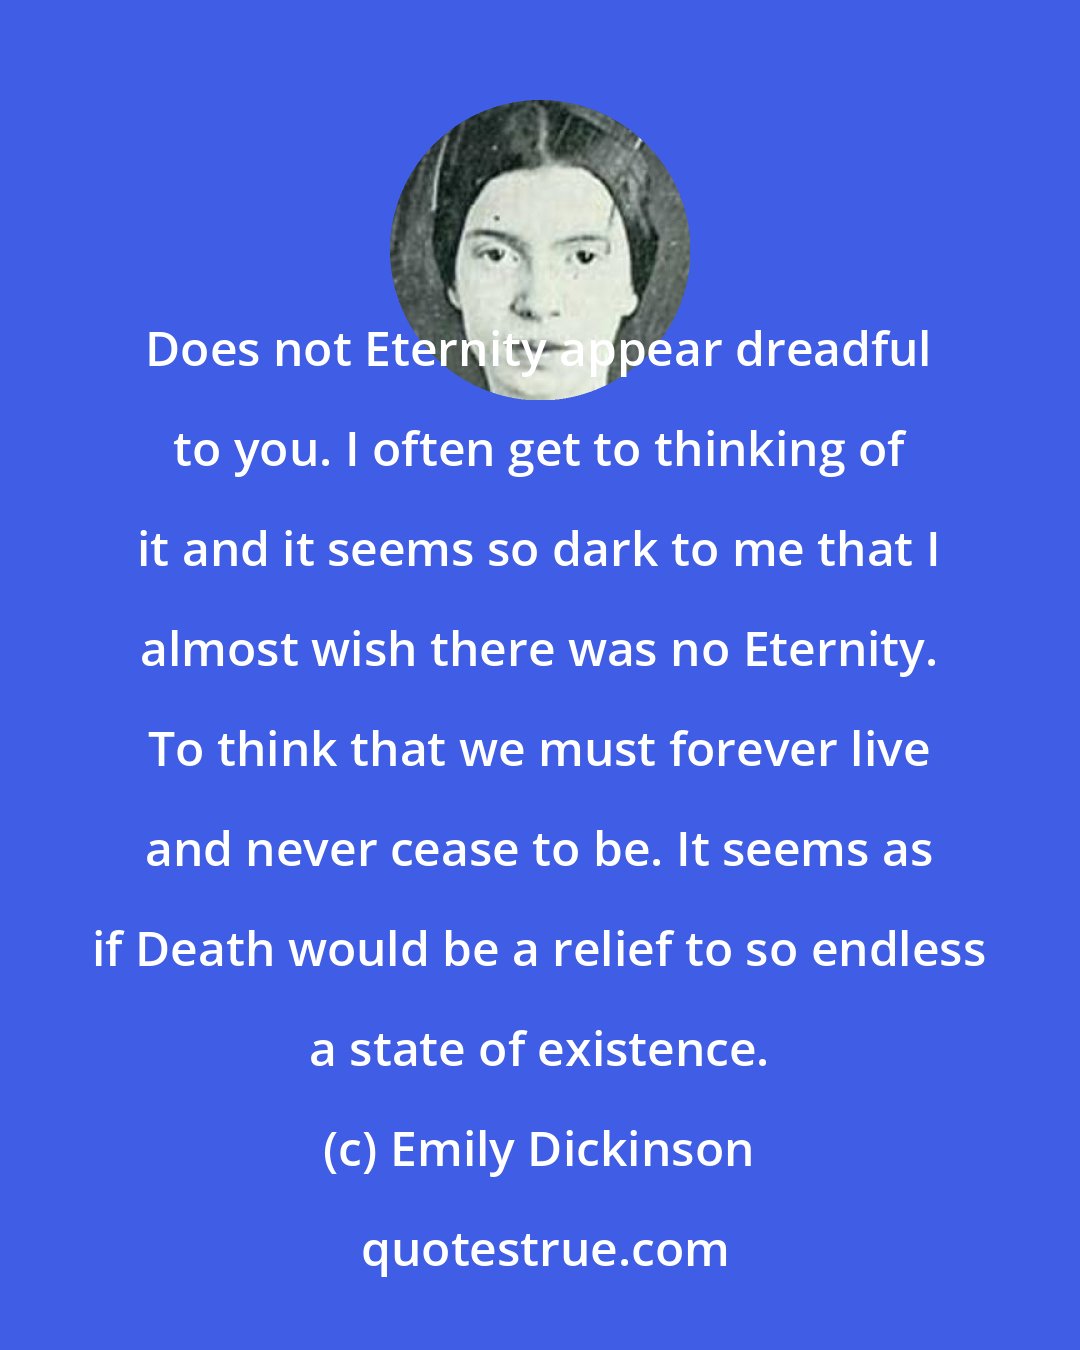 Emily Dickinson: Does not Eternity appear dreadful to you. I often get to thinking of it and it seems so dark to me that I almost wish there was no Eternity. To think that we must forever live and never cease to be. It seems as if Death would be a relief to so endless a state of existence.